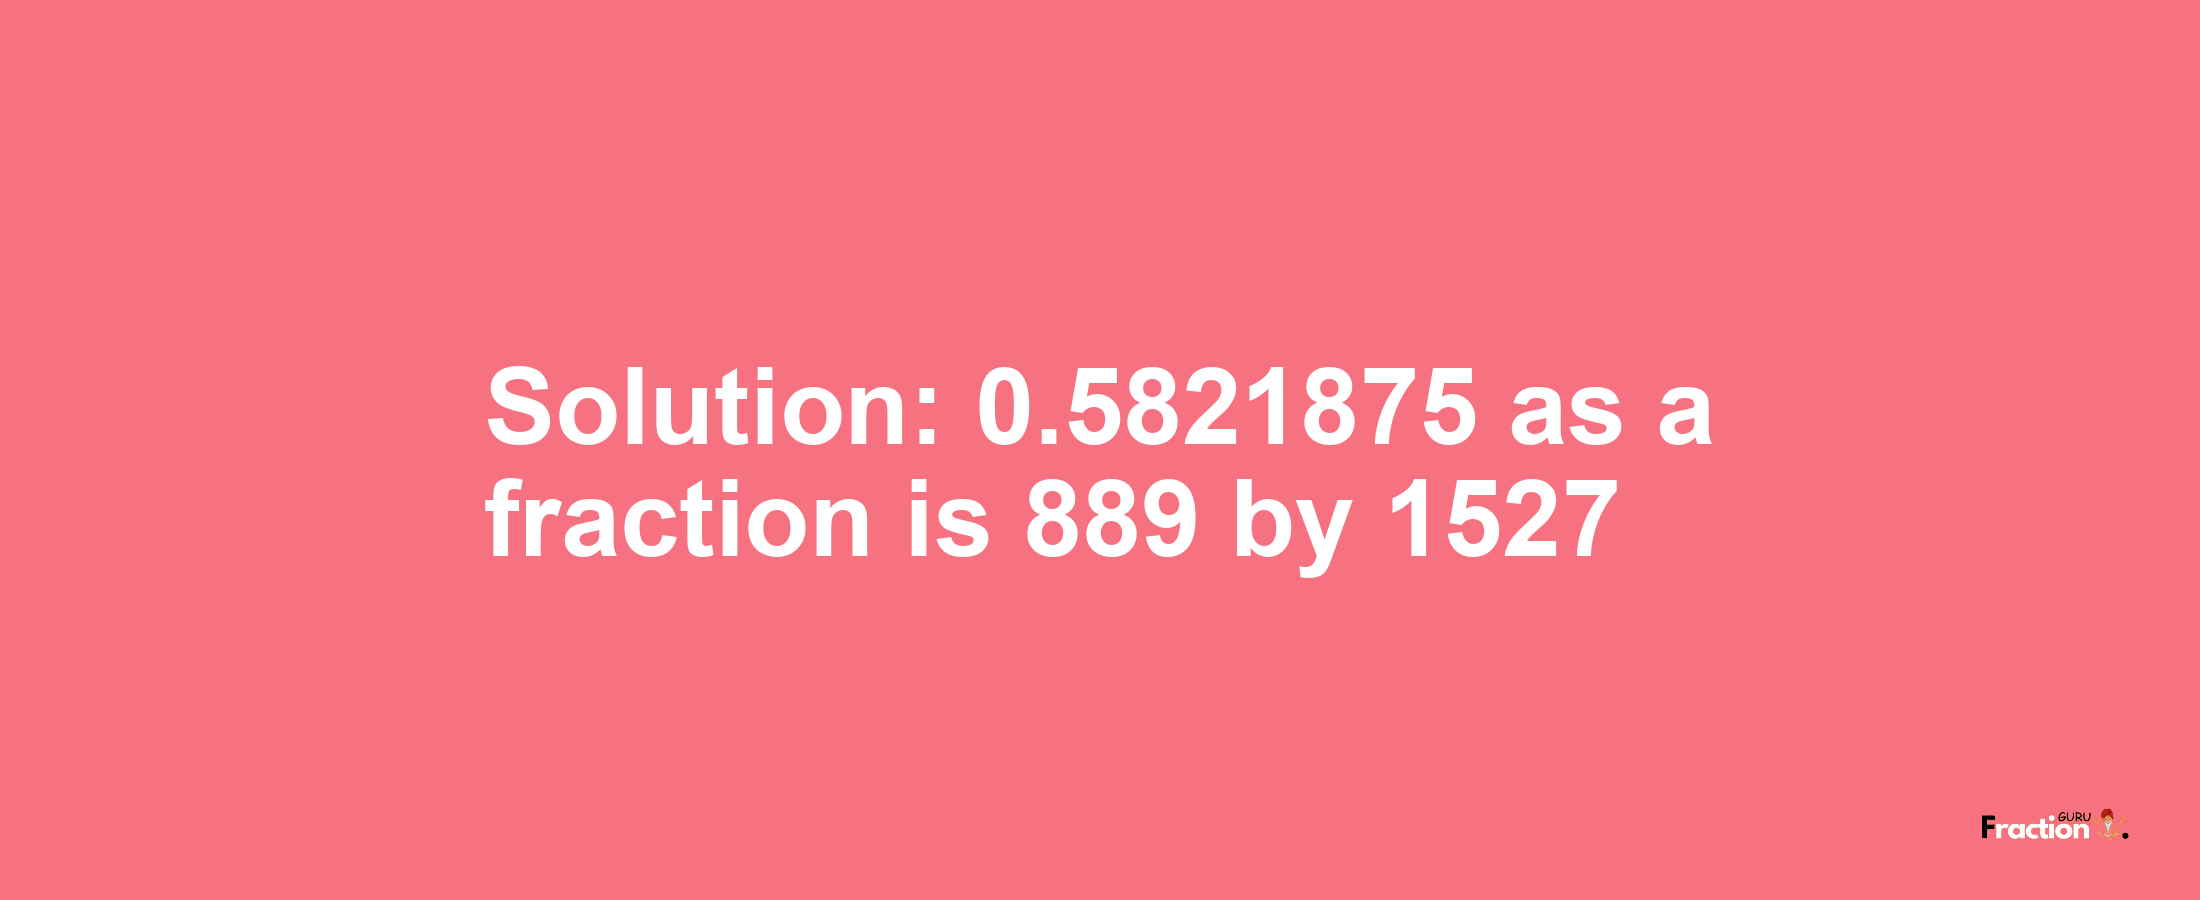 Solution:0.5821875 as a fraction is 889/1527